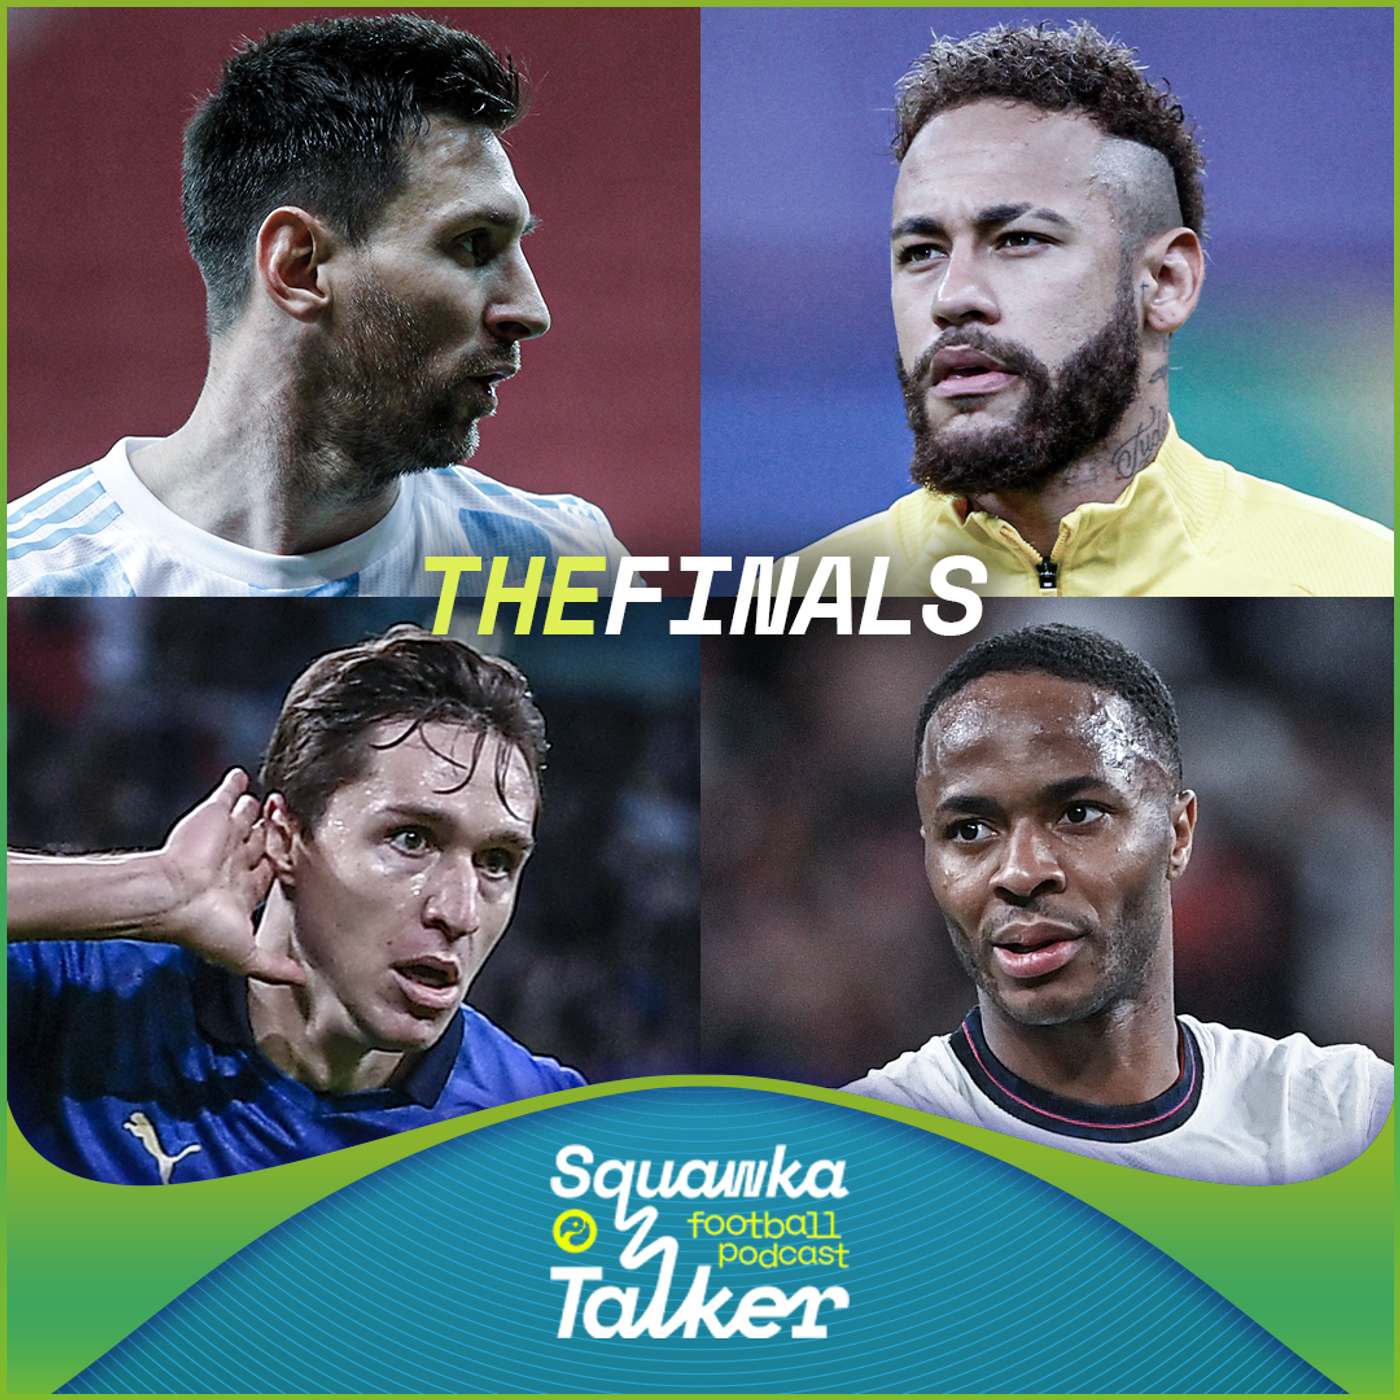 EURO 2020: Italy vs England final preview... and Messi vs Neymar straight after